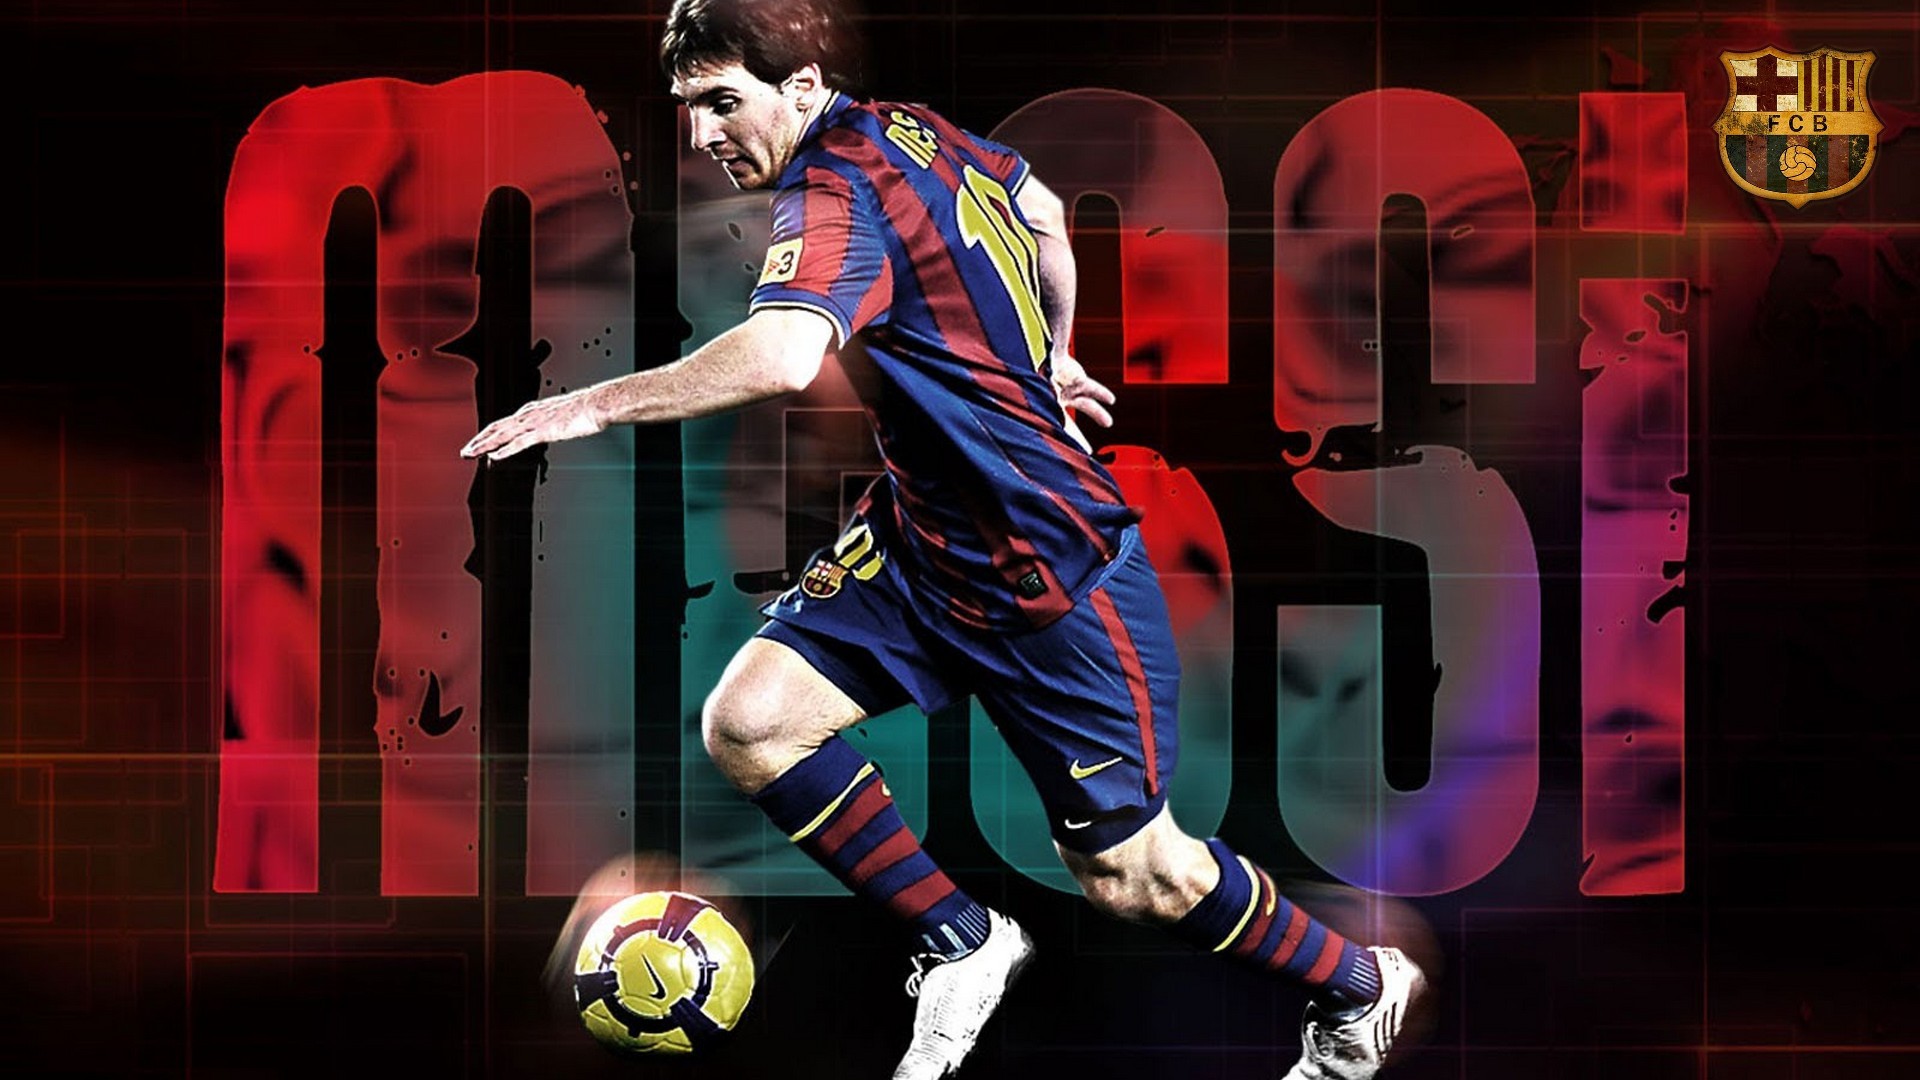 Lionel Messi Barcelona Wallpaper For Mac Backgrounds With Resolution 1920X1080 pixel. You can make this wallpaper for your Mac or Windows Desktop Background, iPhone, Android or Tablet and another Smartphone device for free